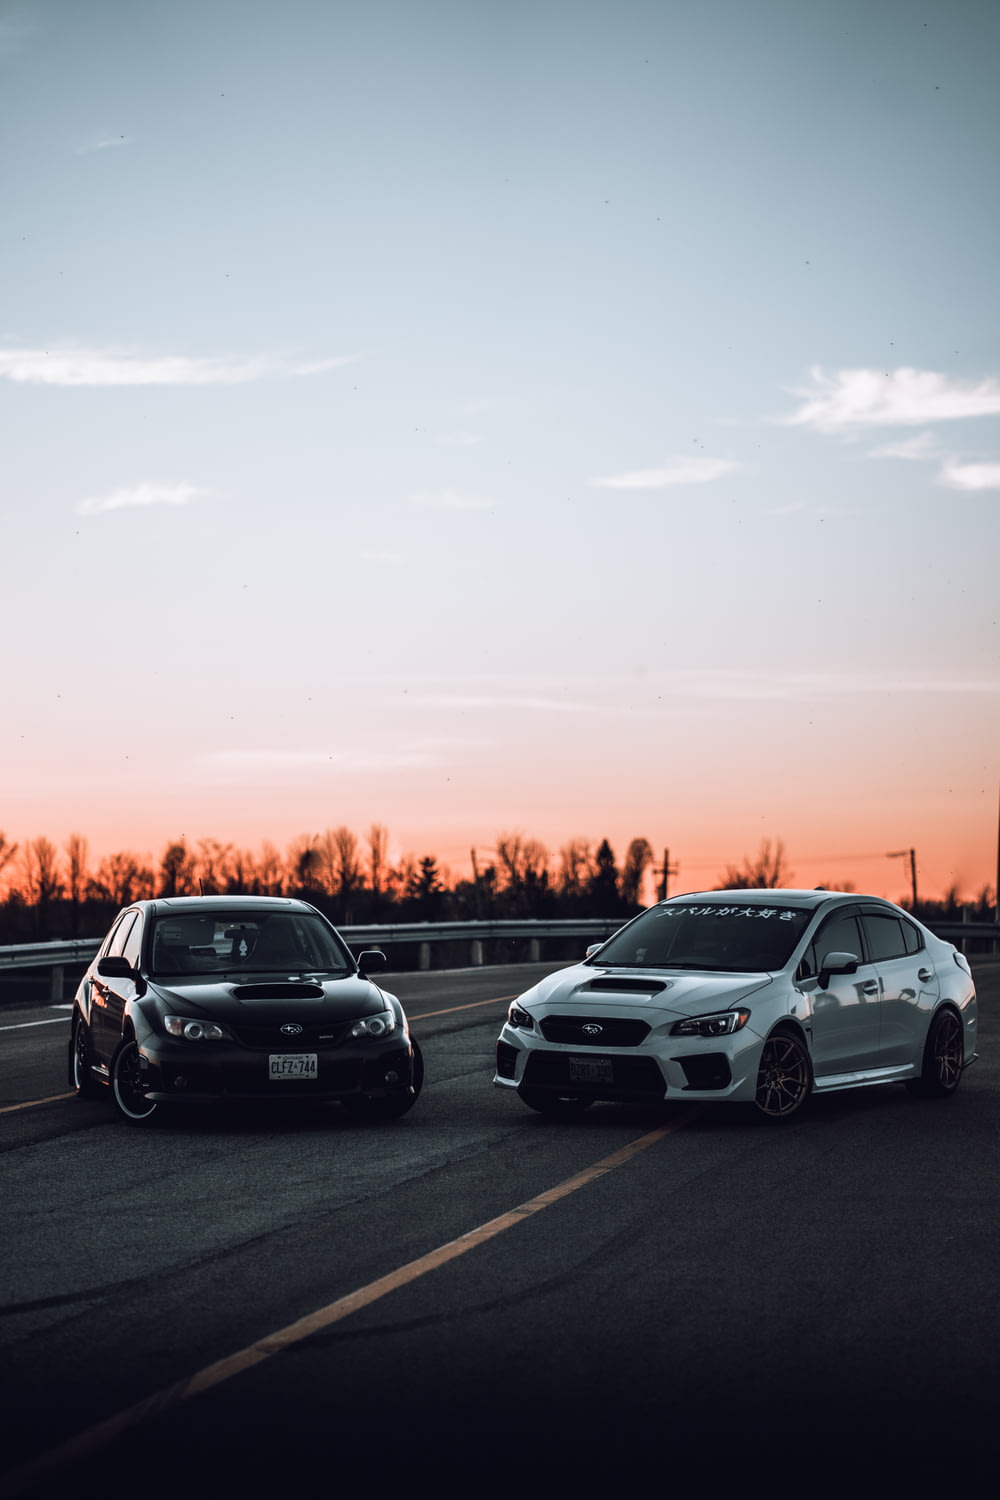 white and black cars on road during sunset